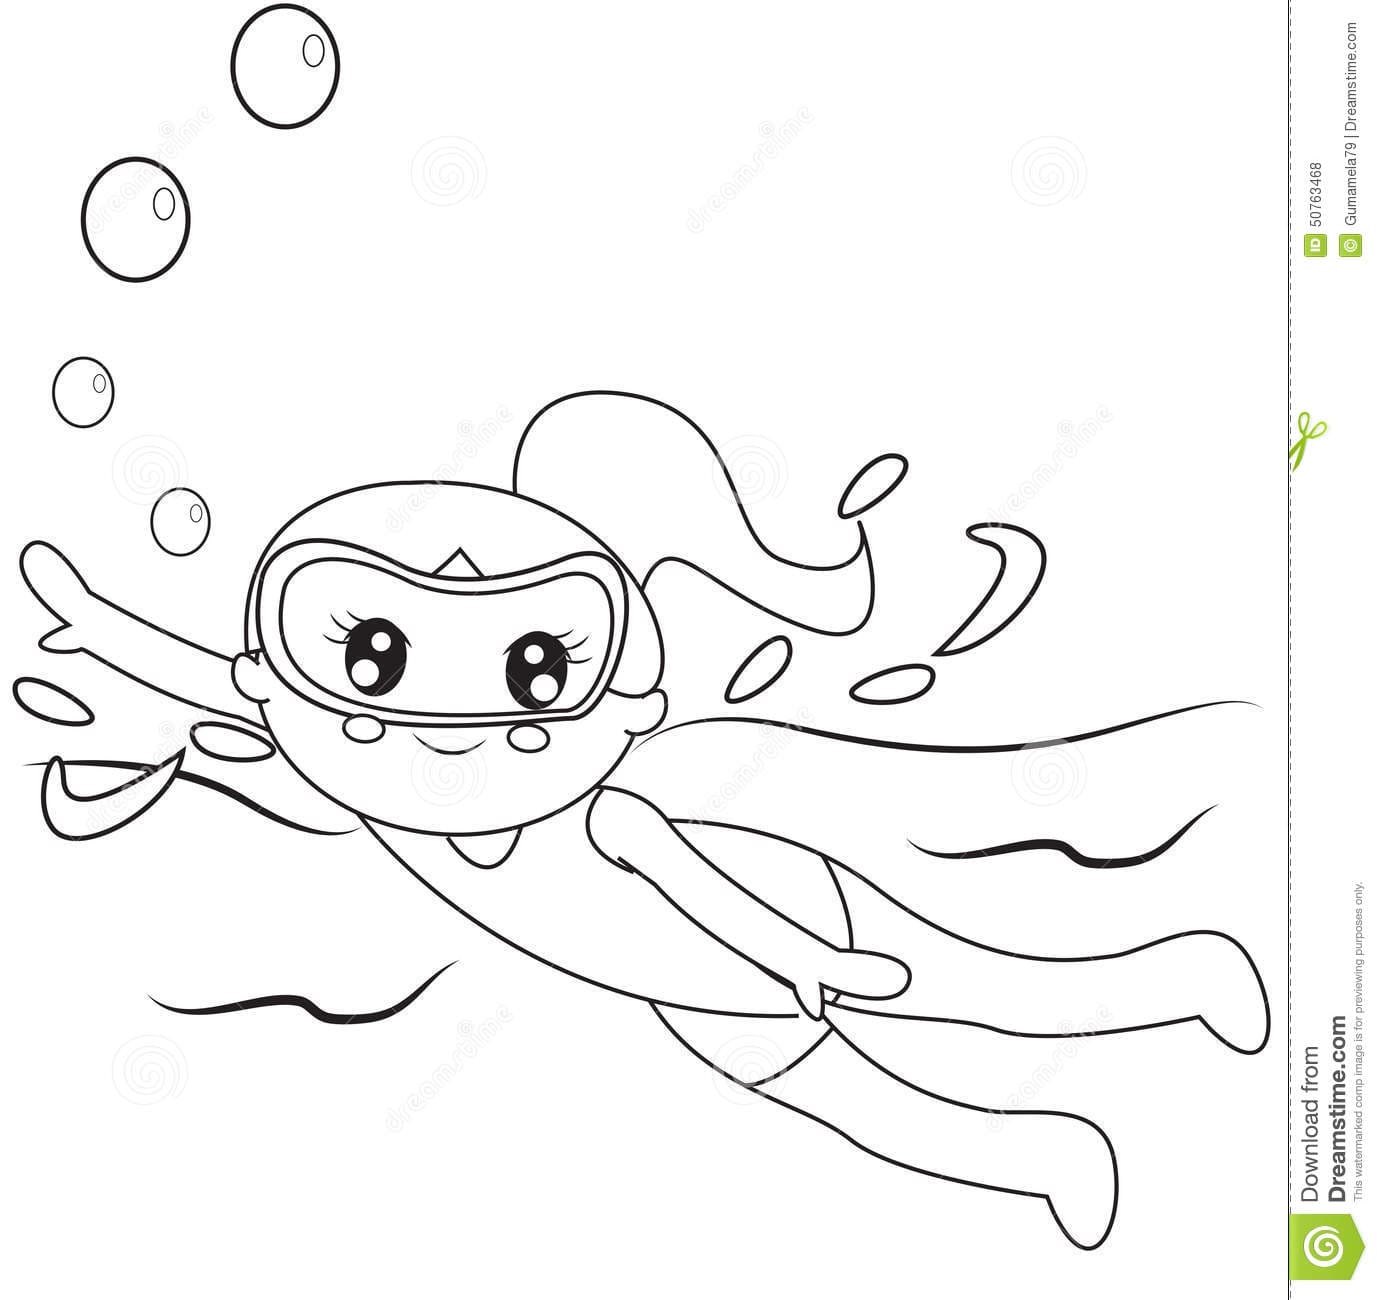 Swimmer coloring page Coloring Page